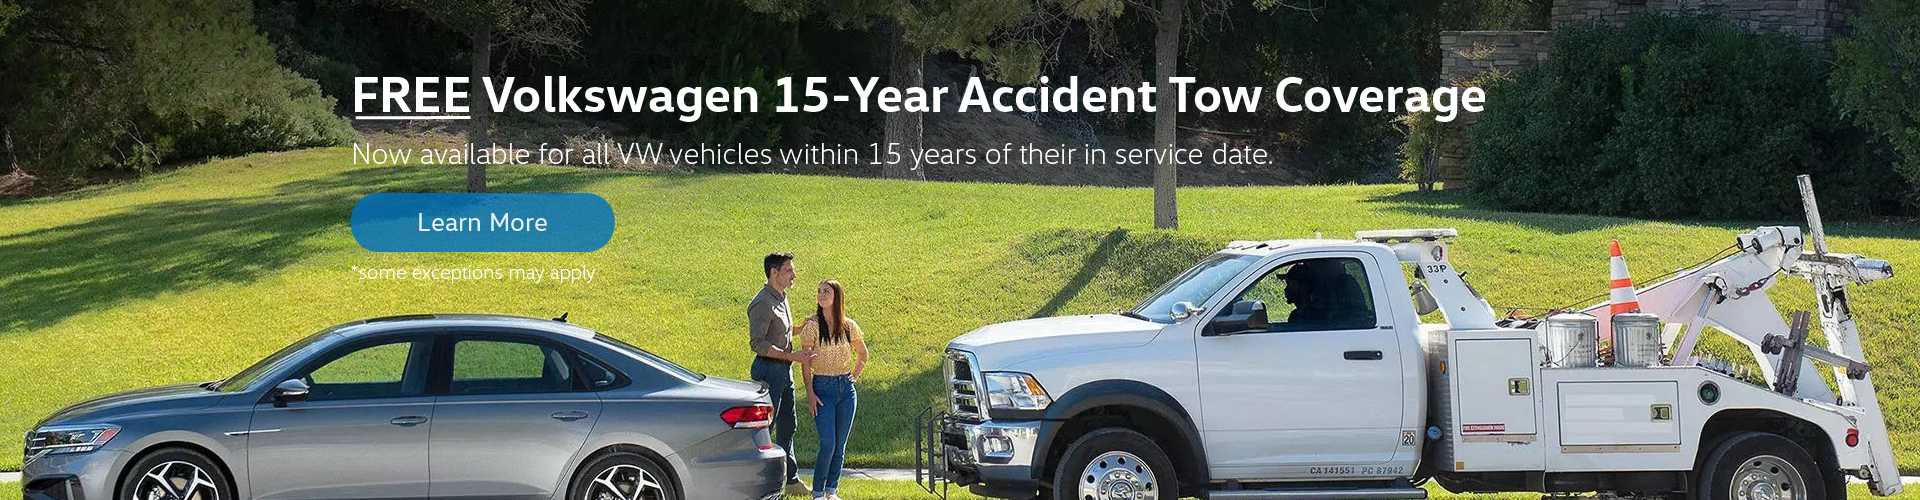 VW 15 Year Accident Towing Coverage